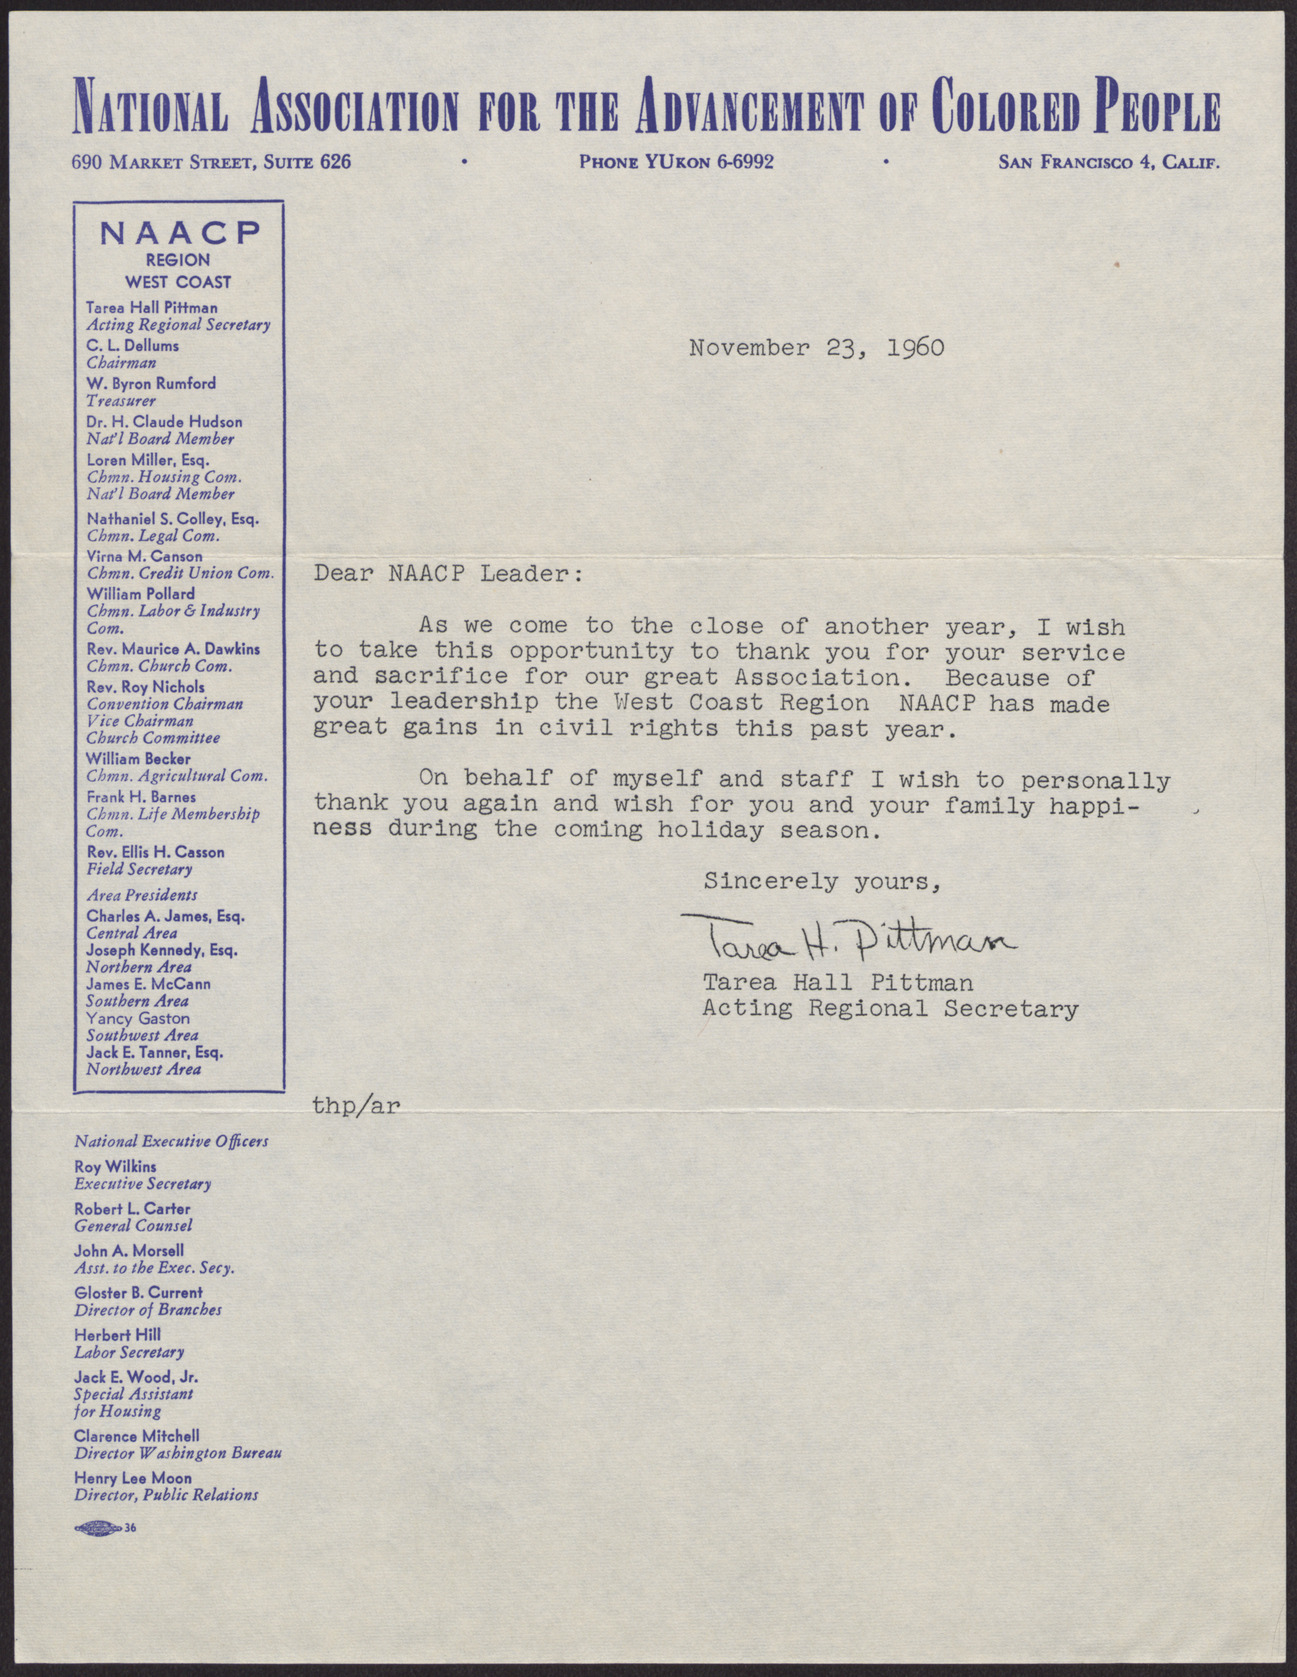 Letter to unnamed NAACP Leaders from Tarea Hall Pittman, November 23, 1960